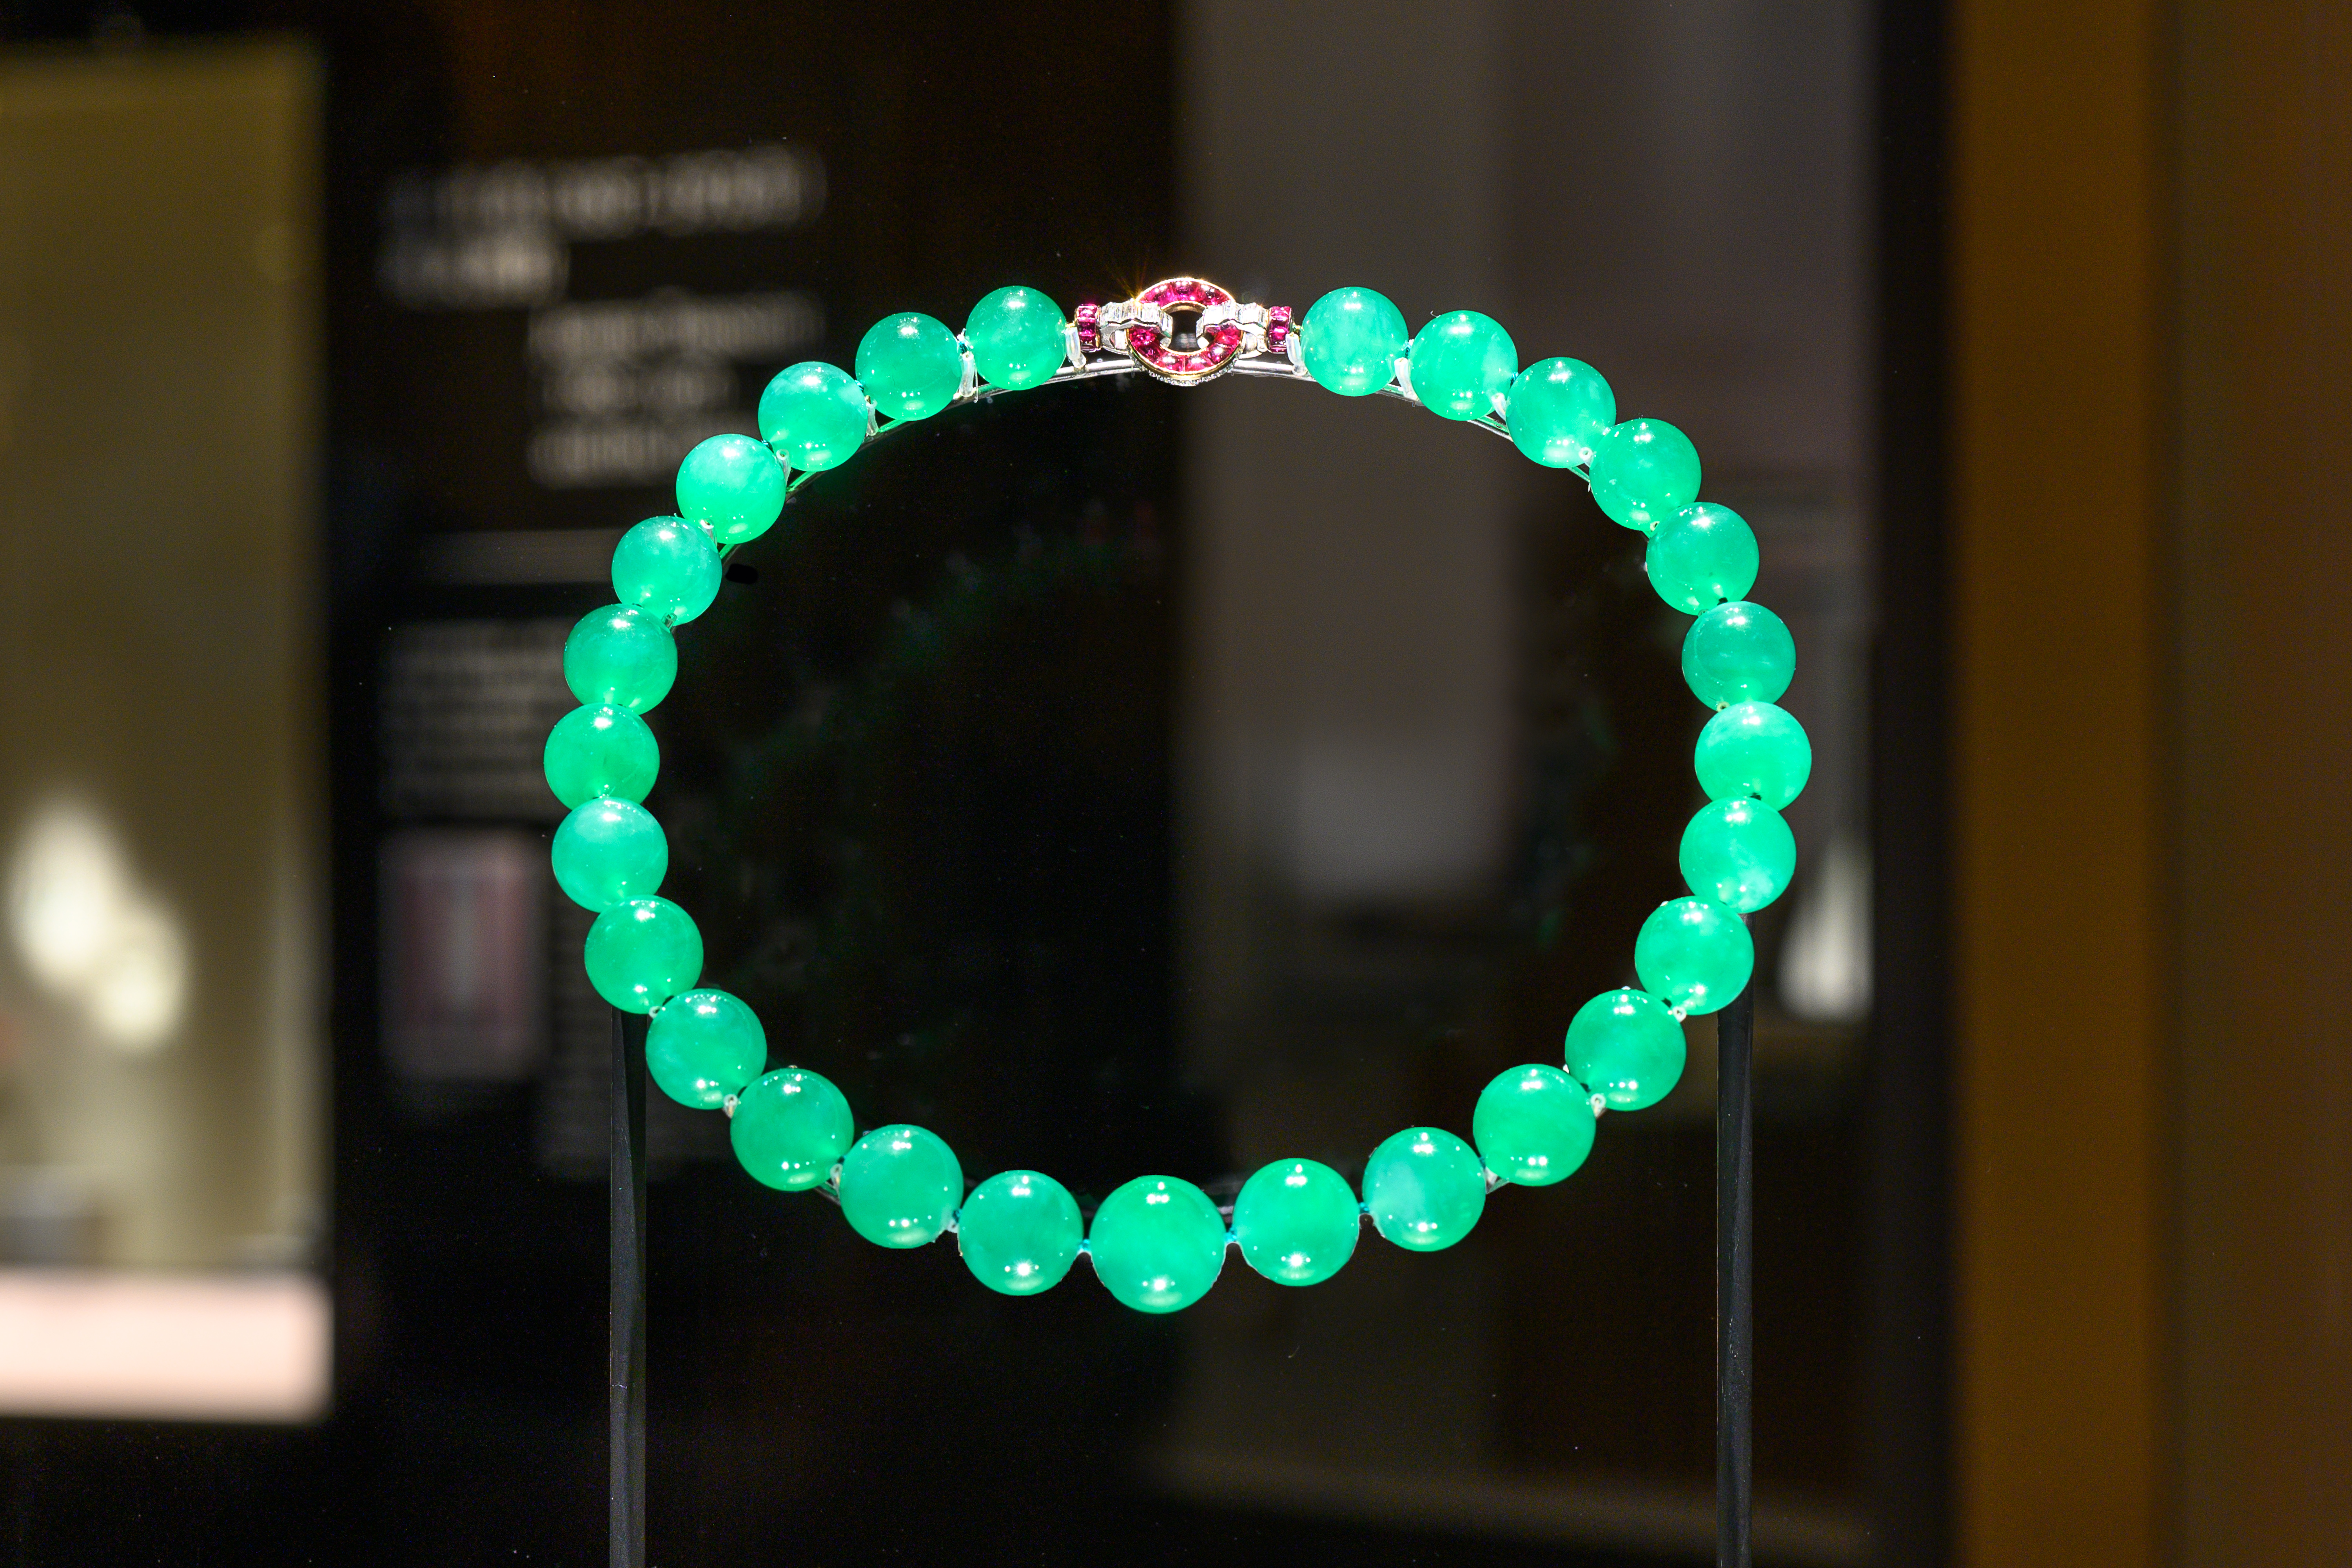 Cartier and Women exhibition